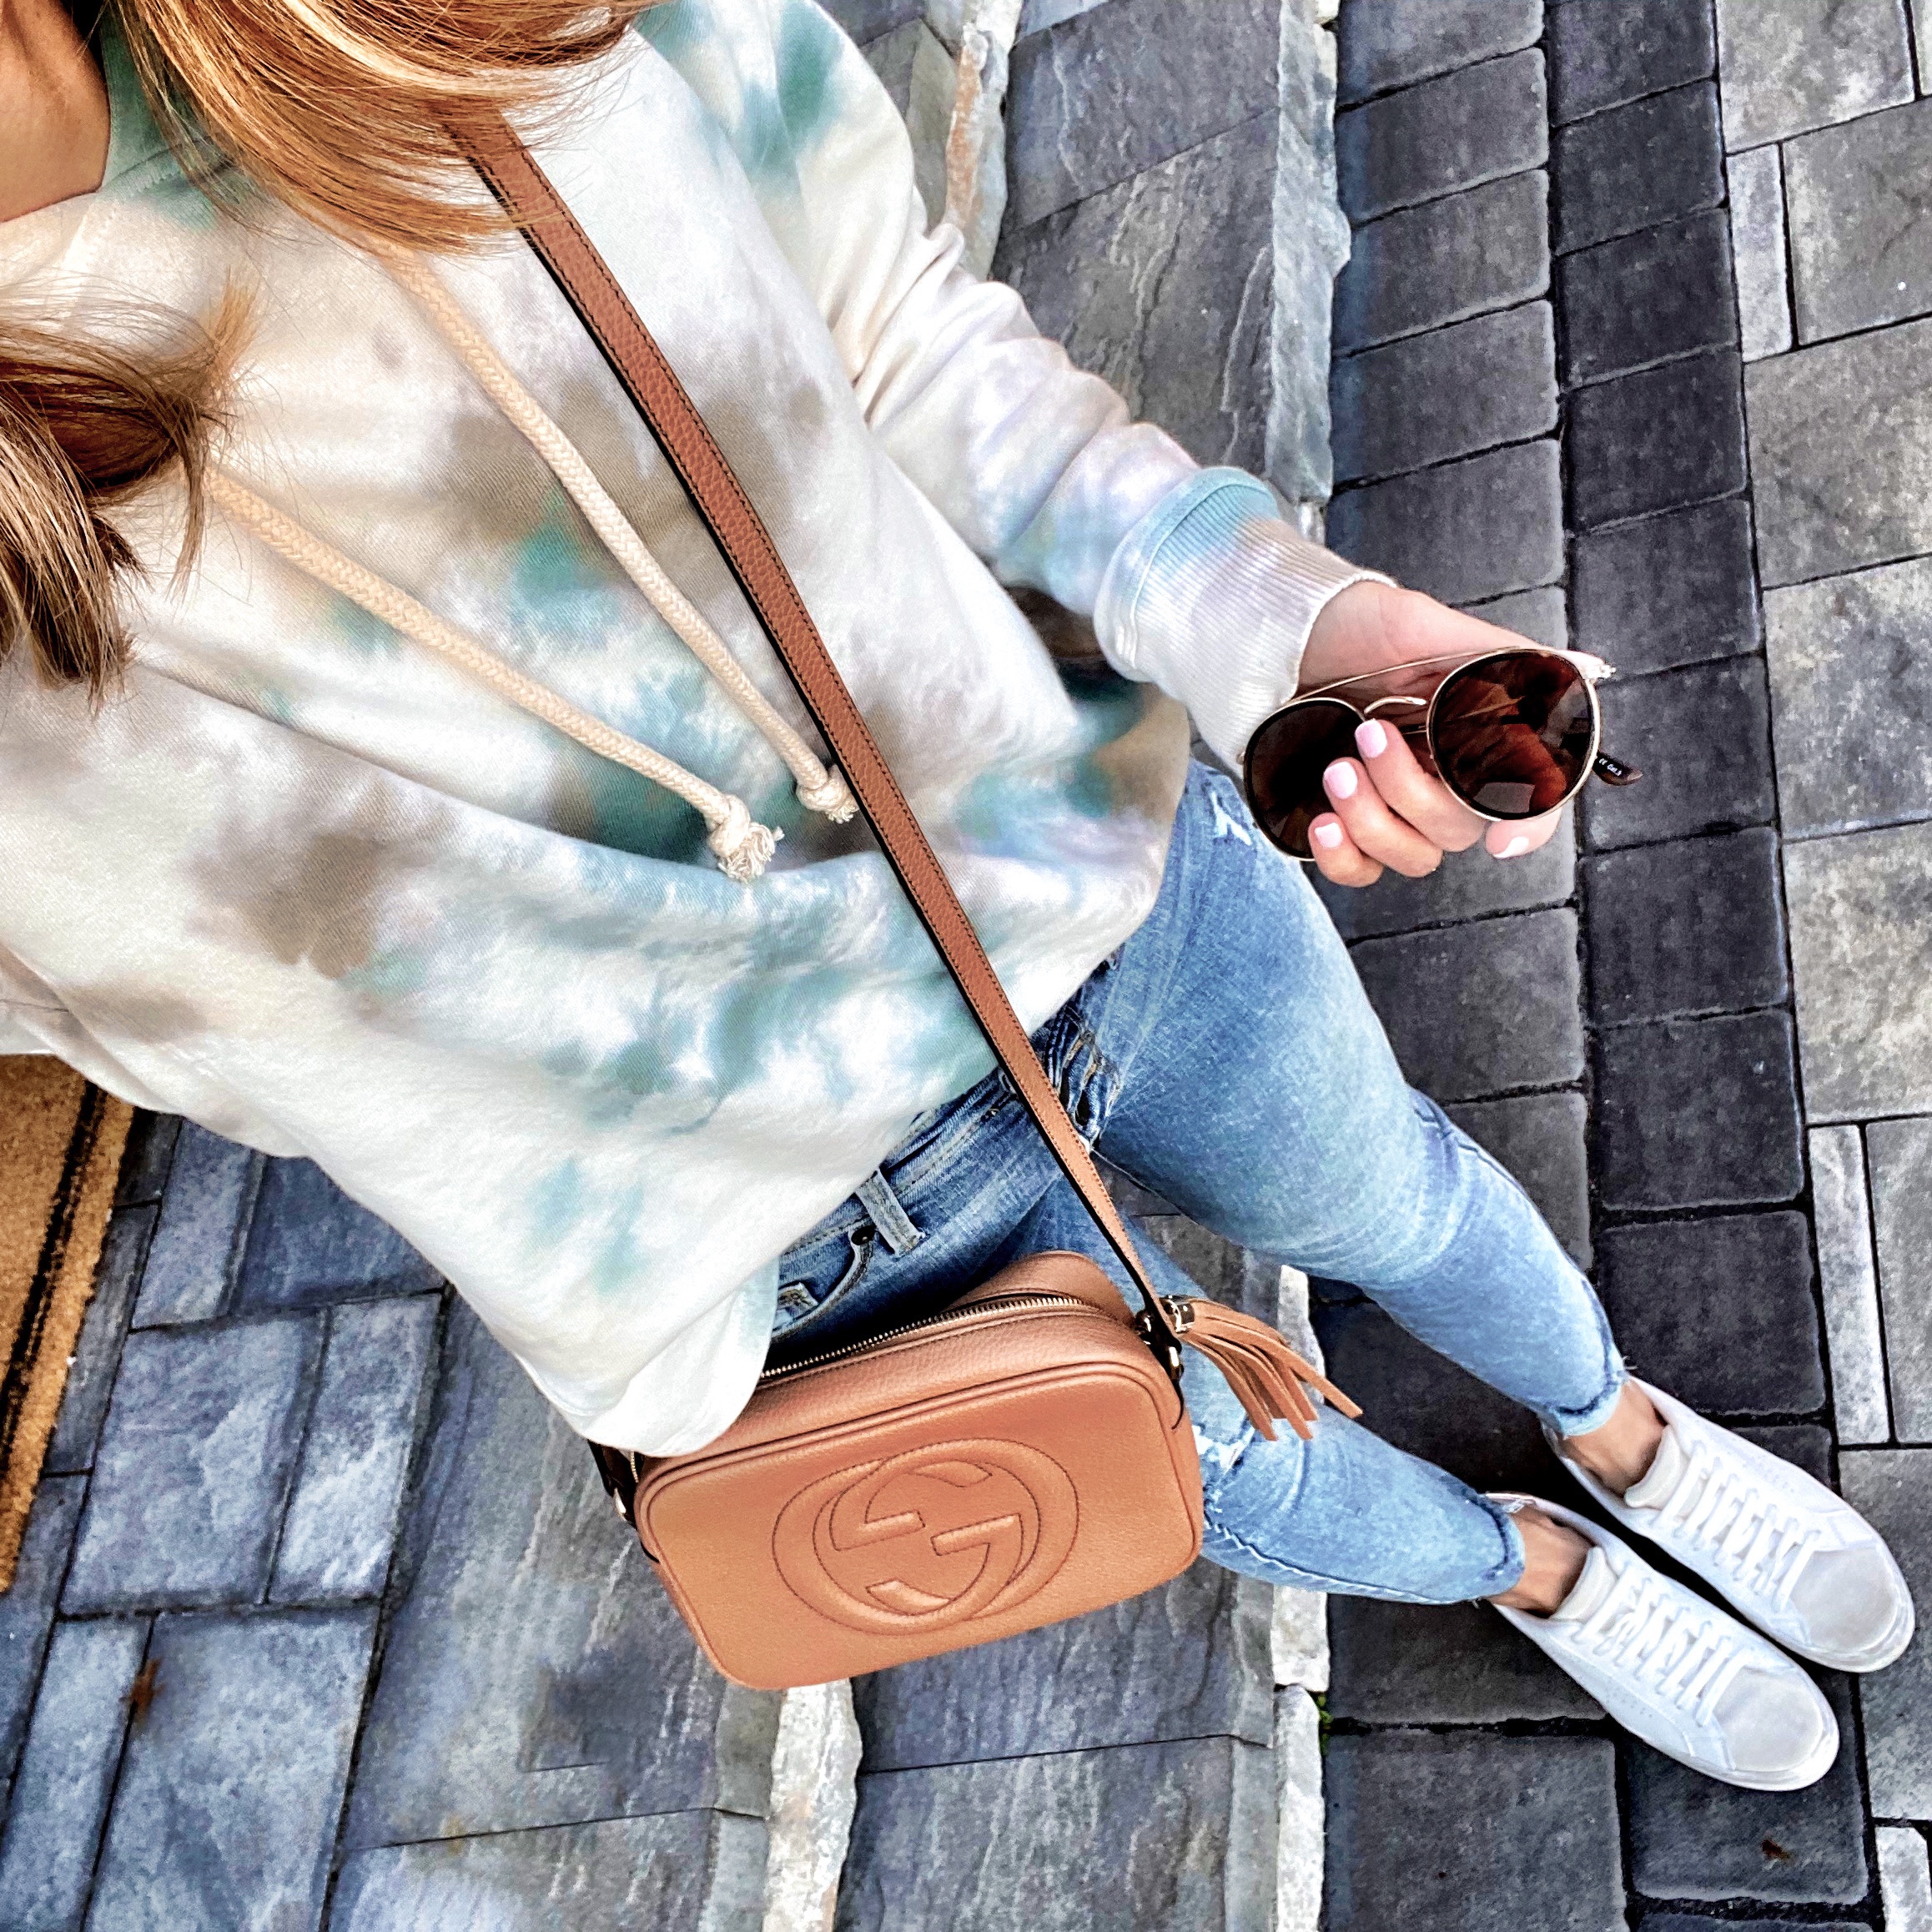 INSTAGRAM OUTFIT DETAILS